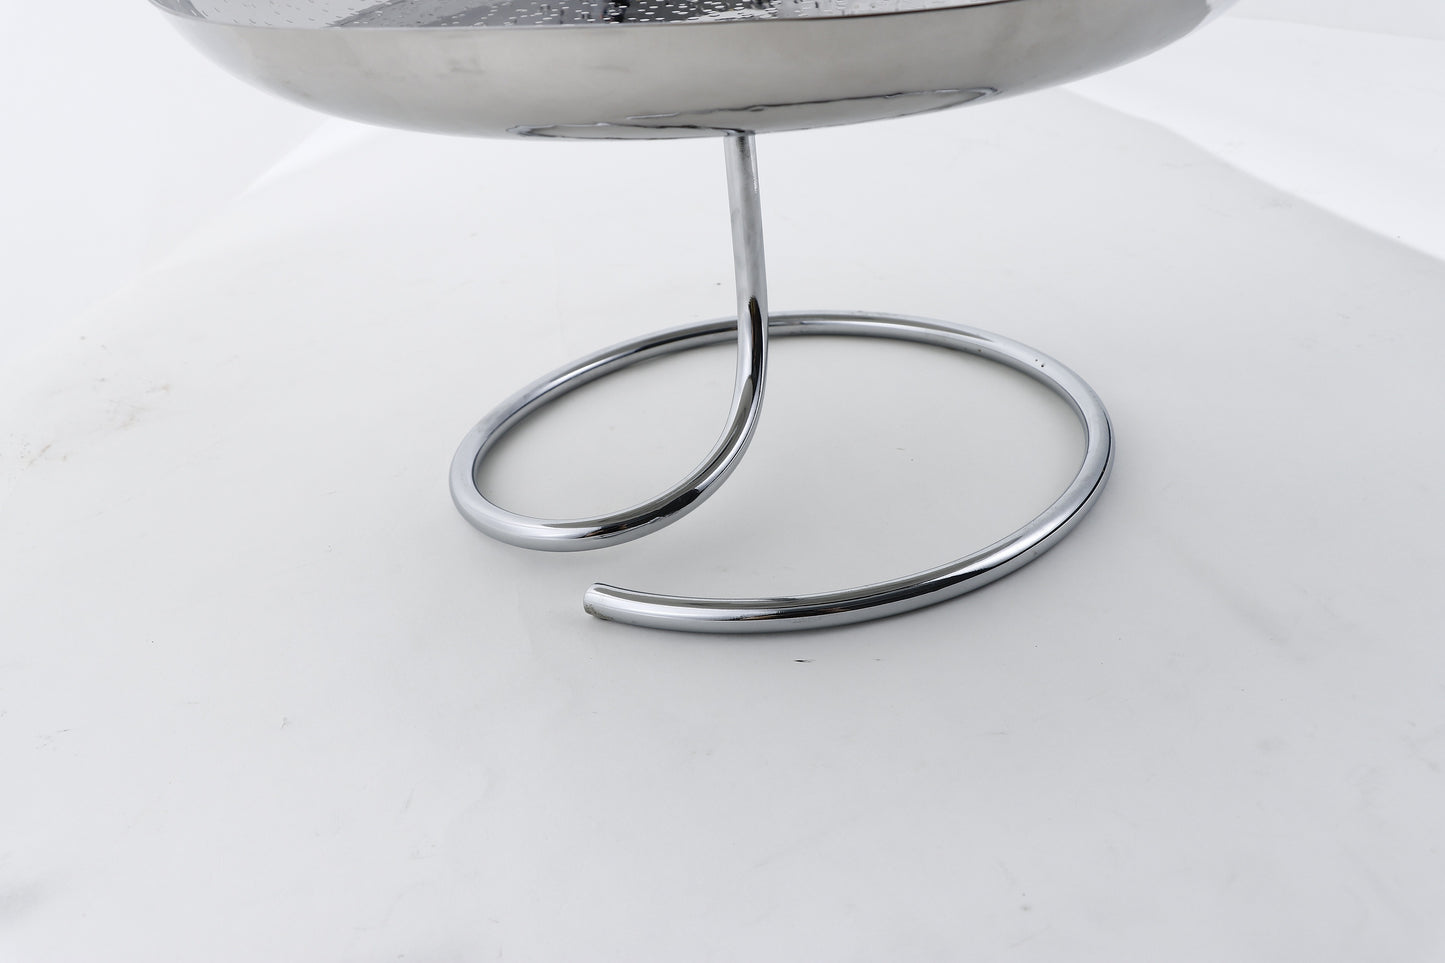 Silver S/S Steel, Iron & Aluminum Cake Stand